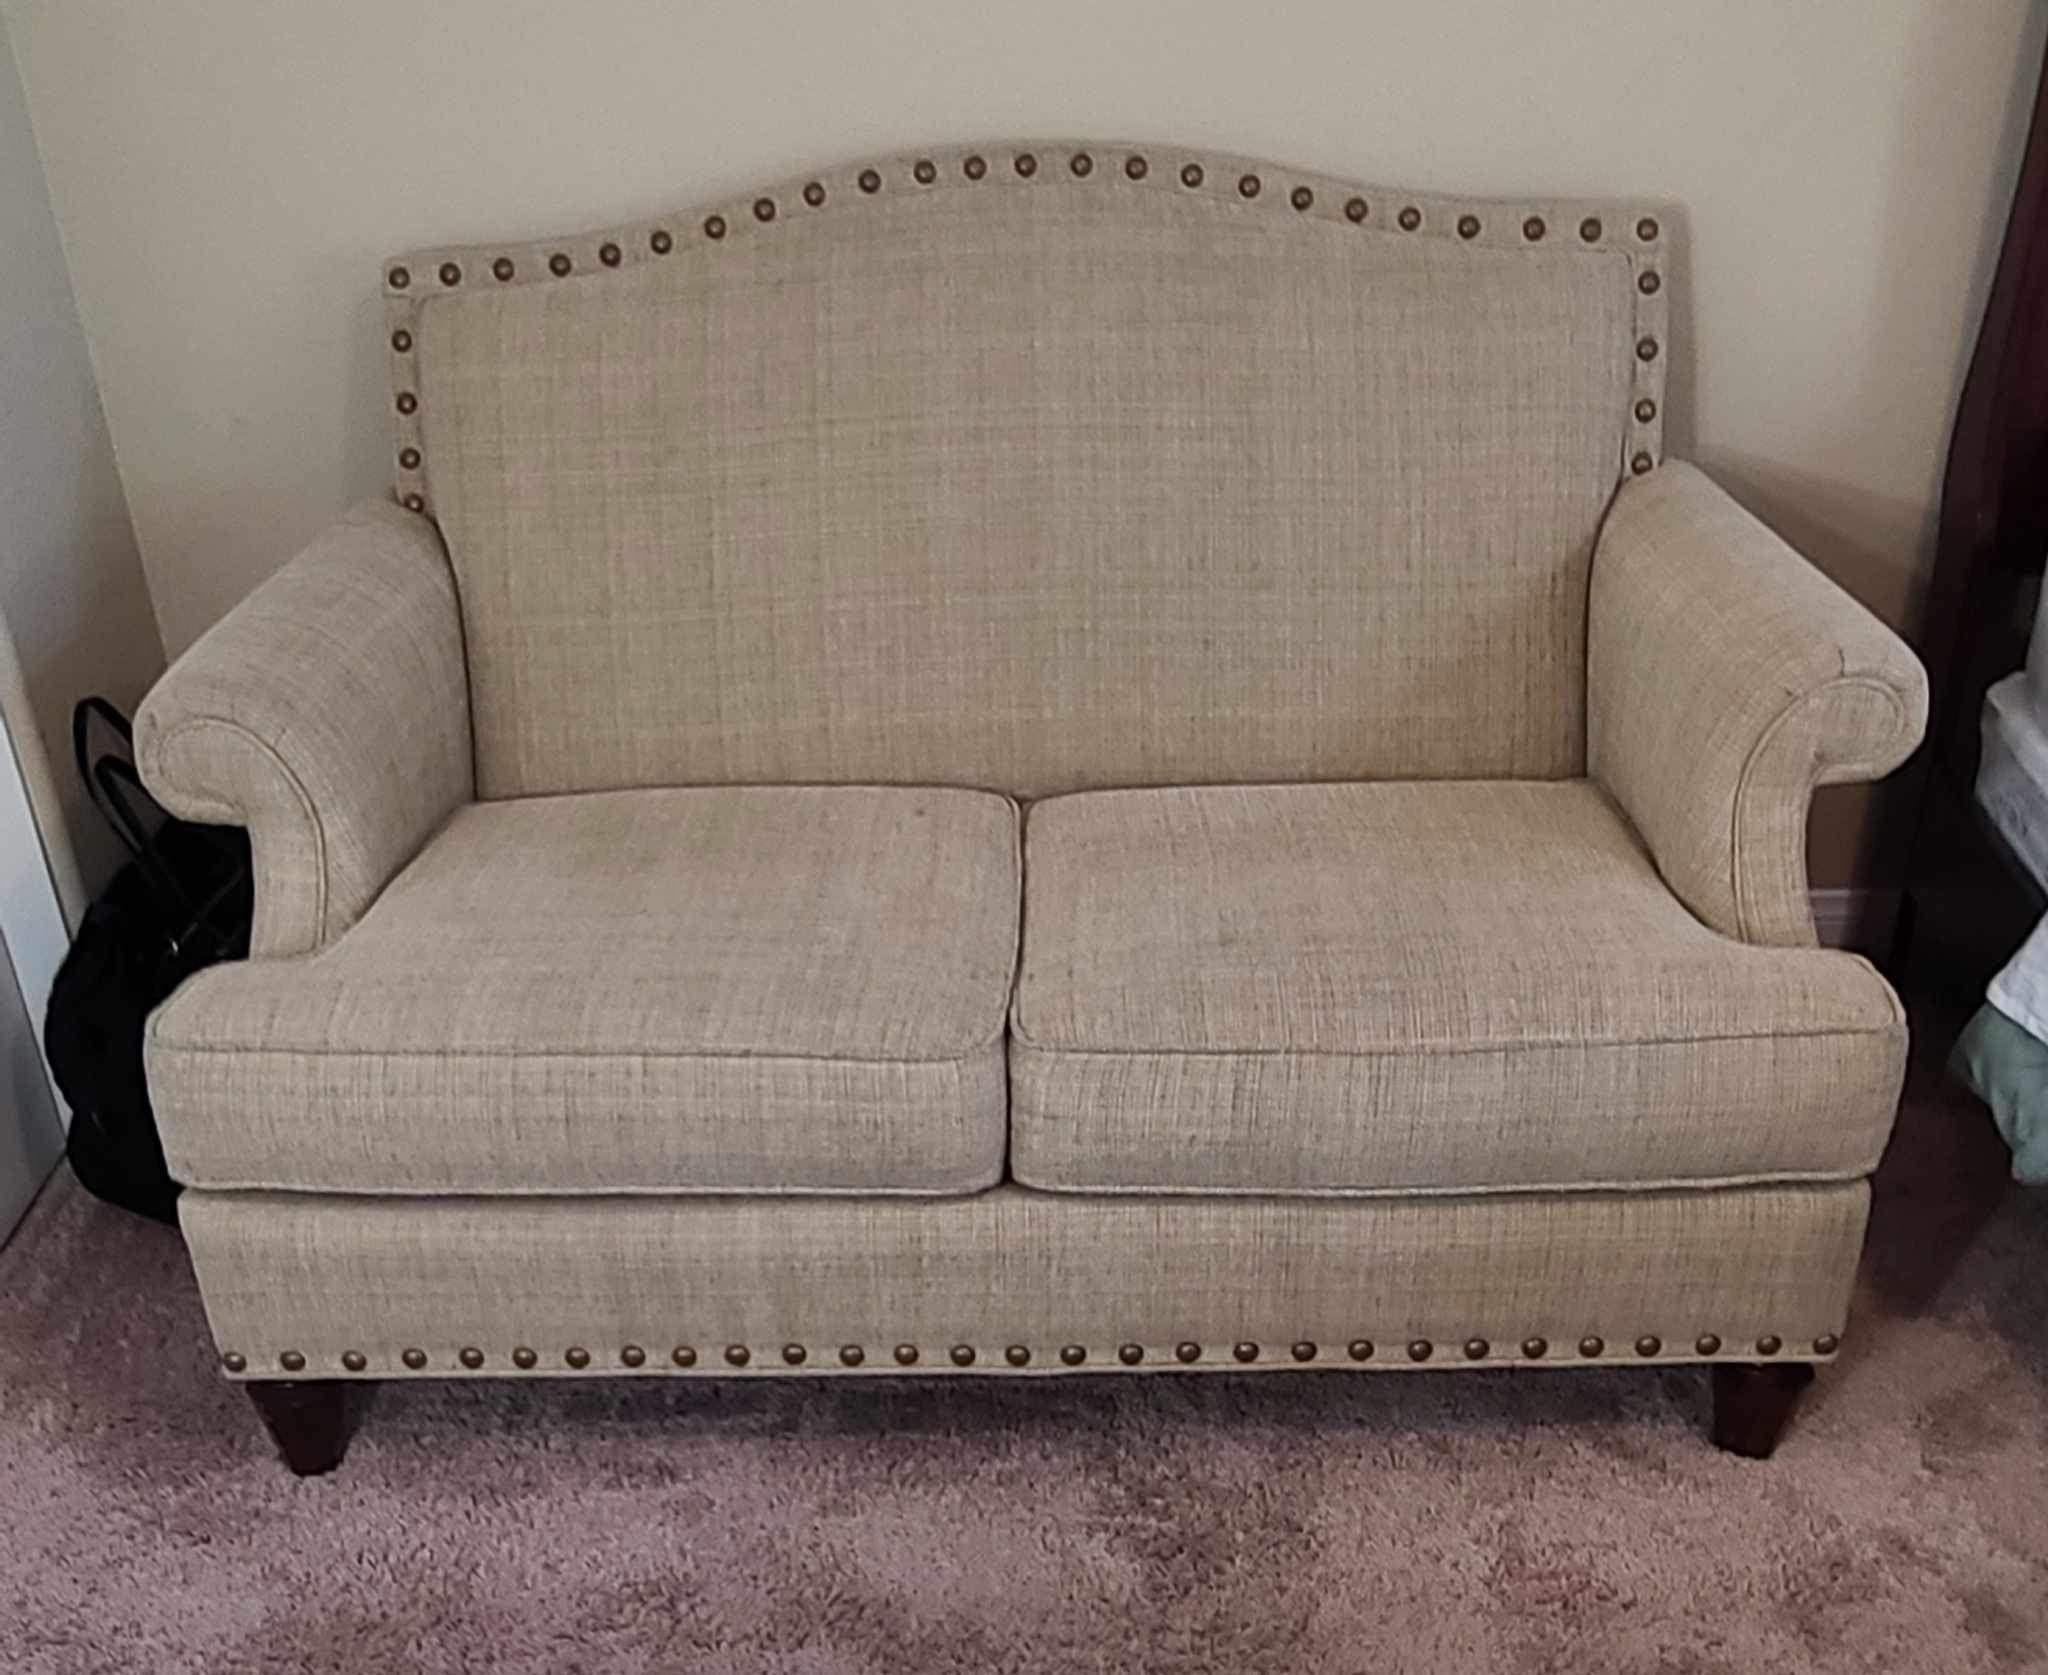 Classic Light Beige Seat Loveseat For $80 Or best Offer